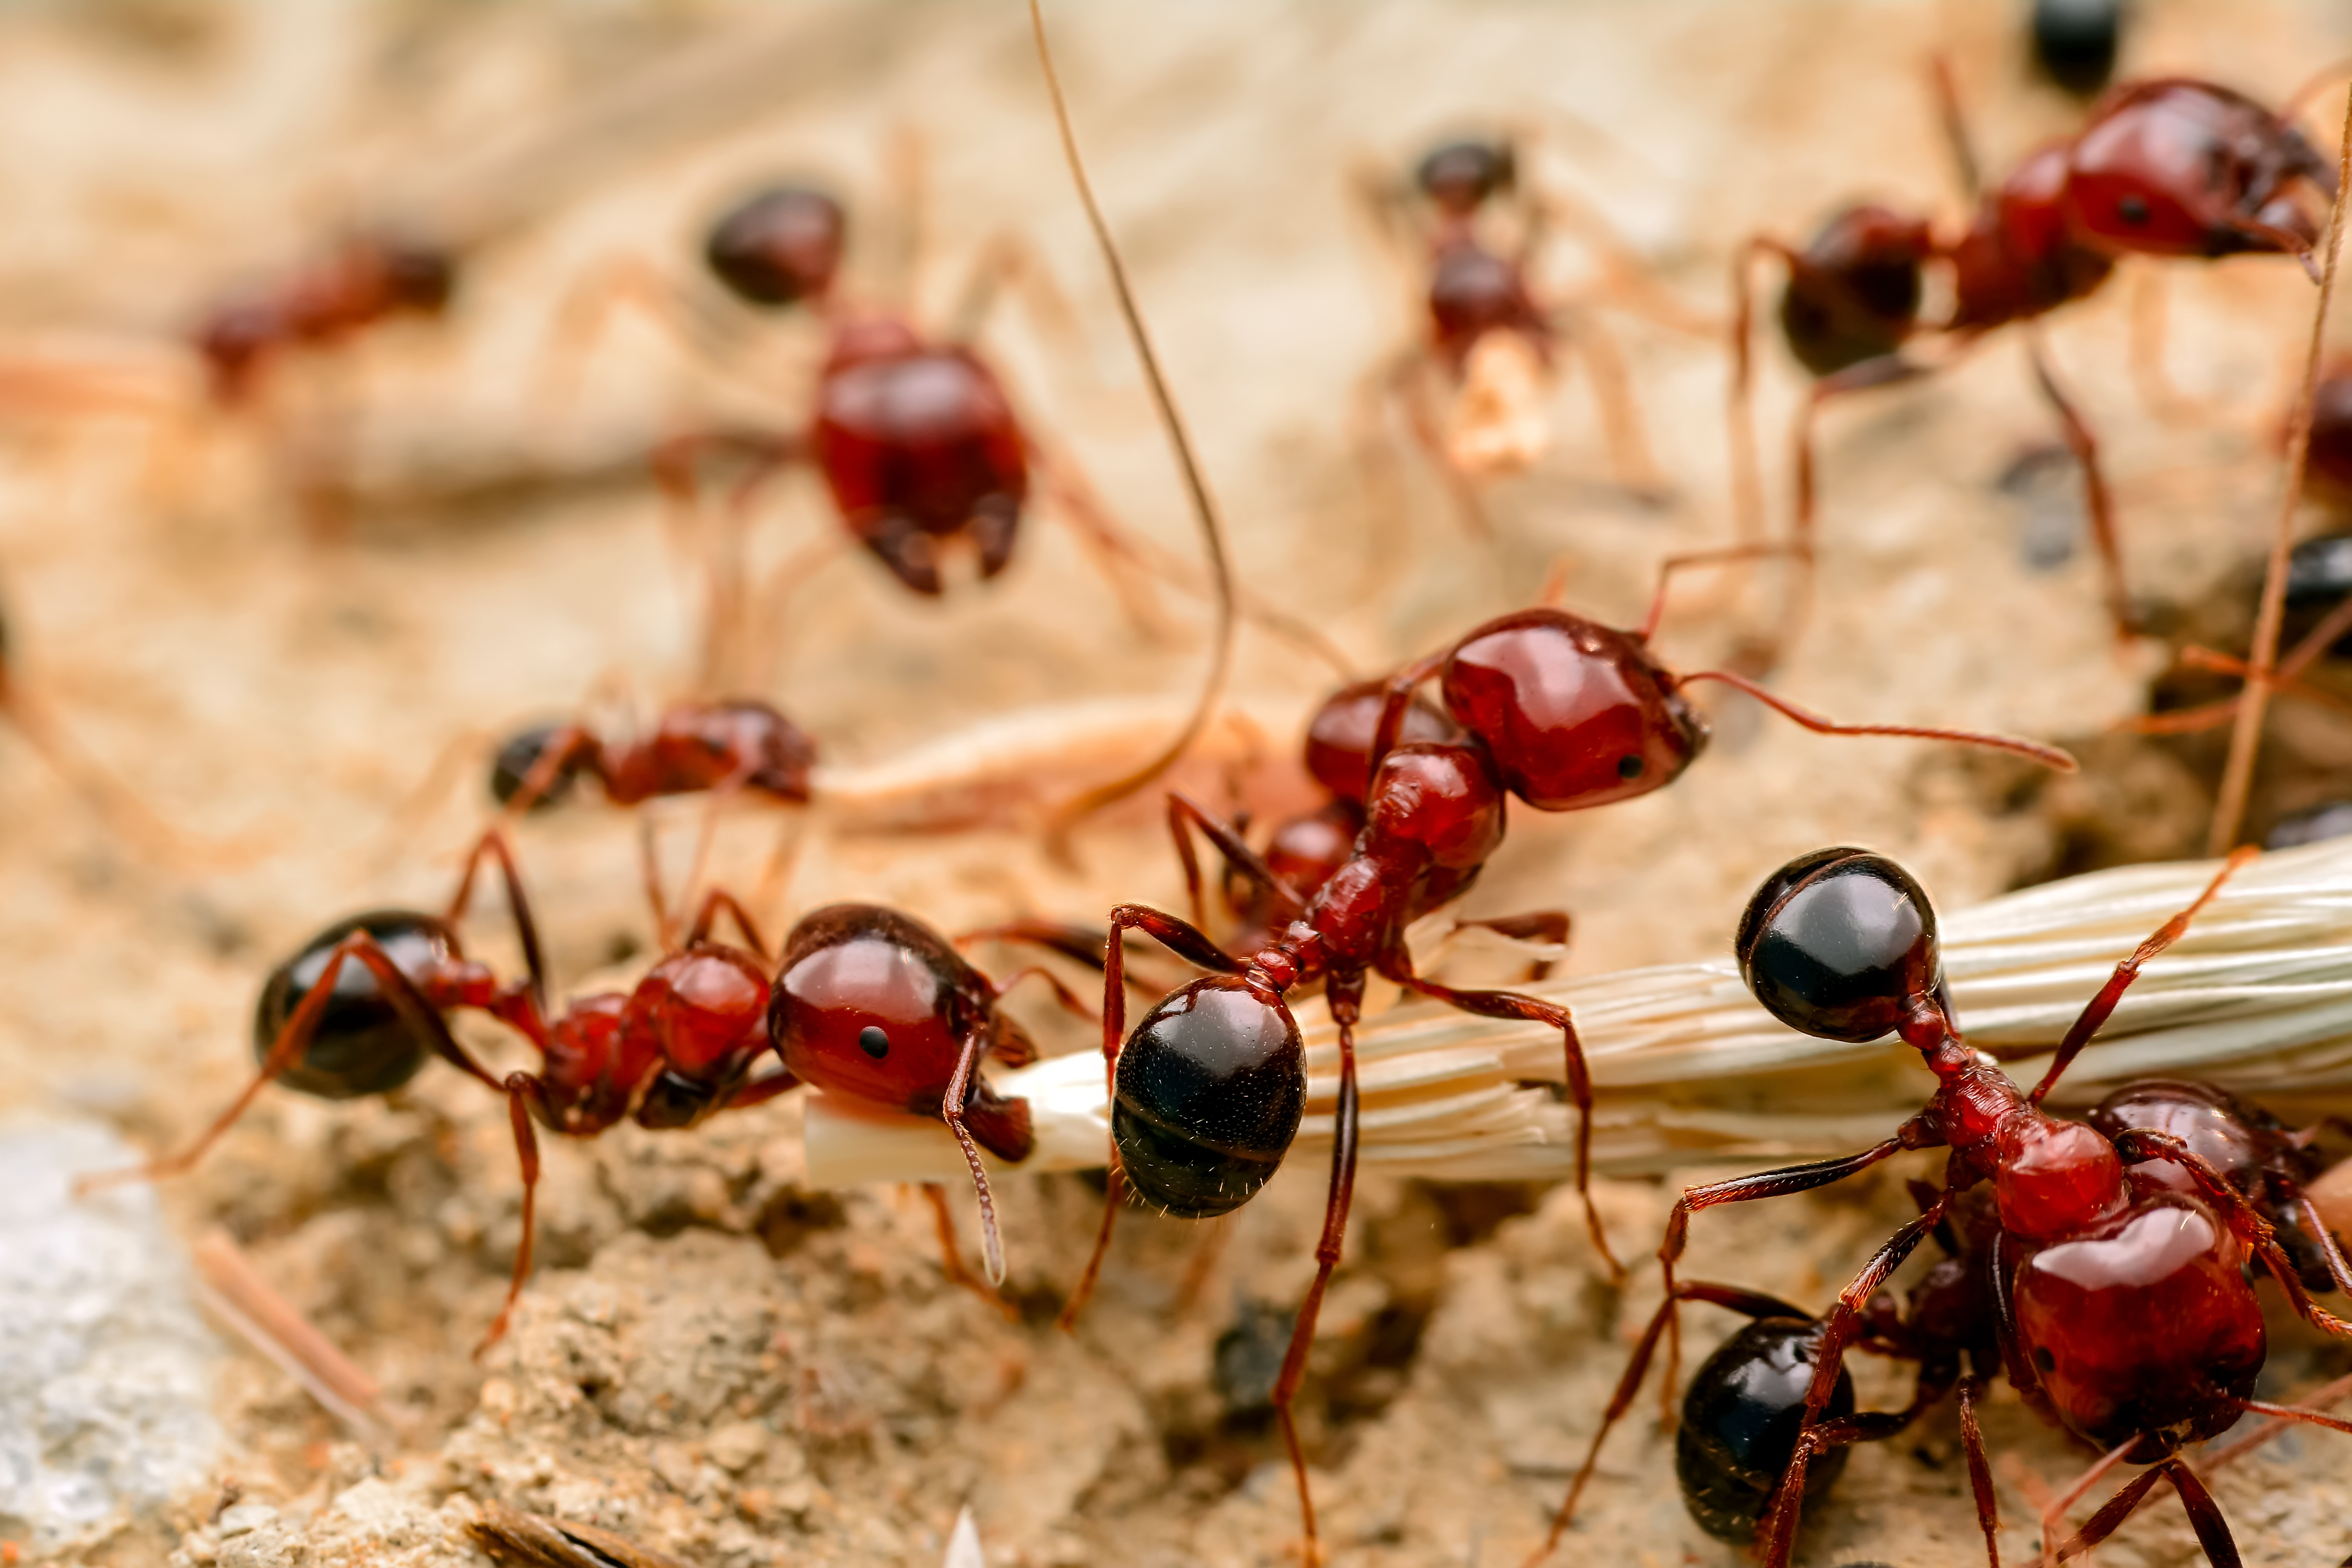 A closeup image on fire ants and their strong pinchers - learn how GGA Pest Management can help with our fire ant control in Killeen, TX.